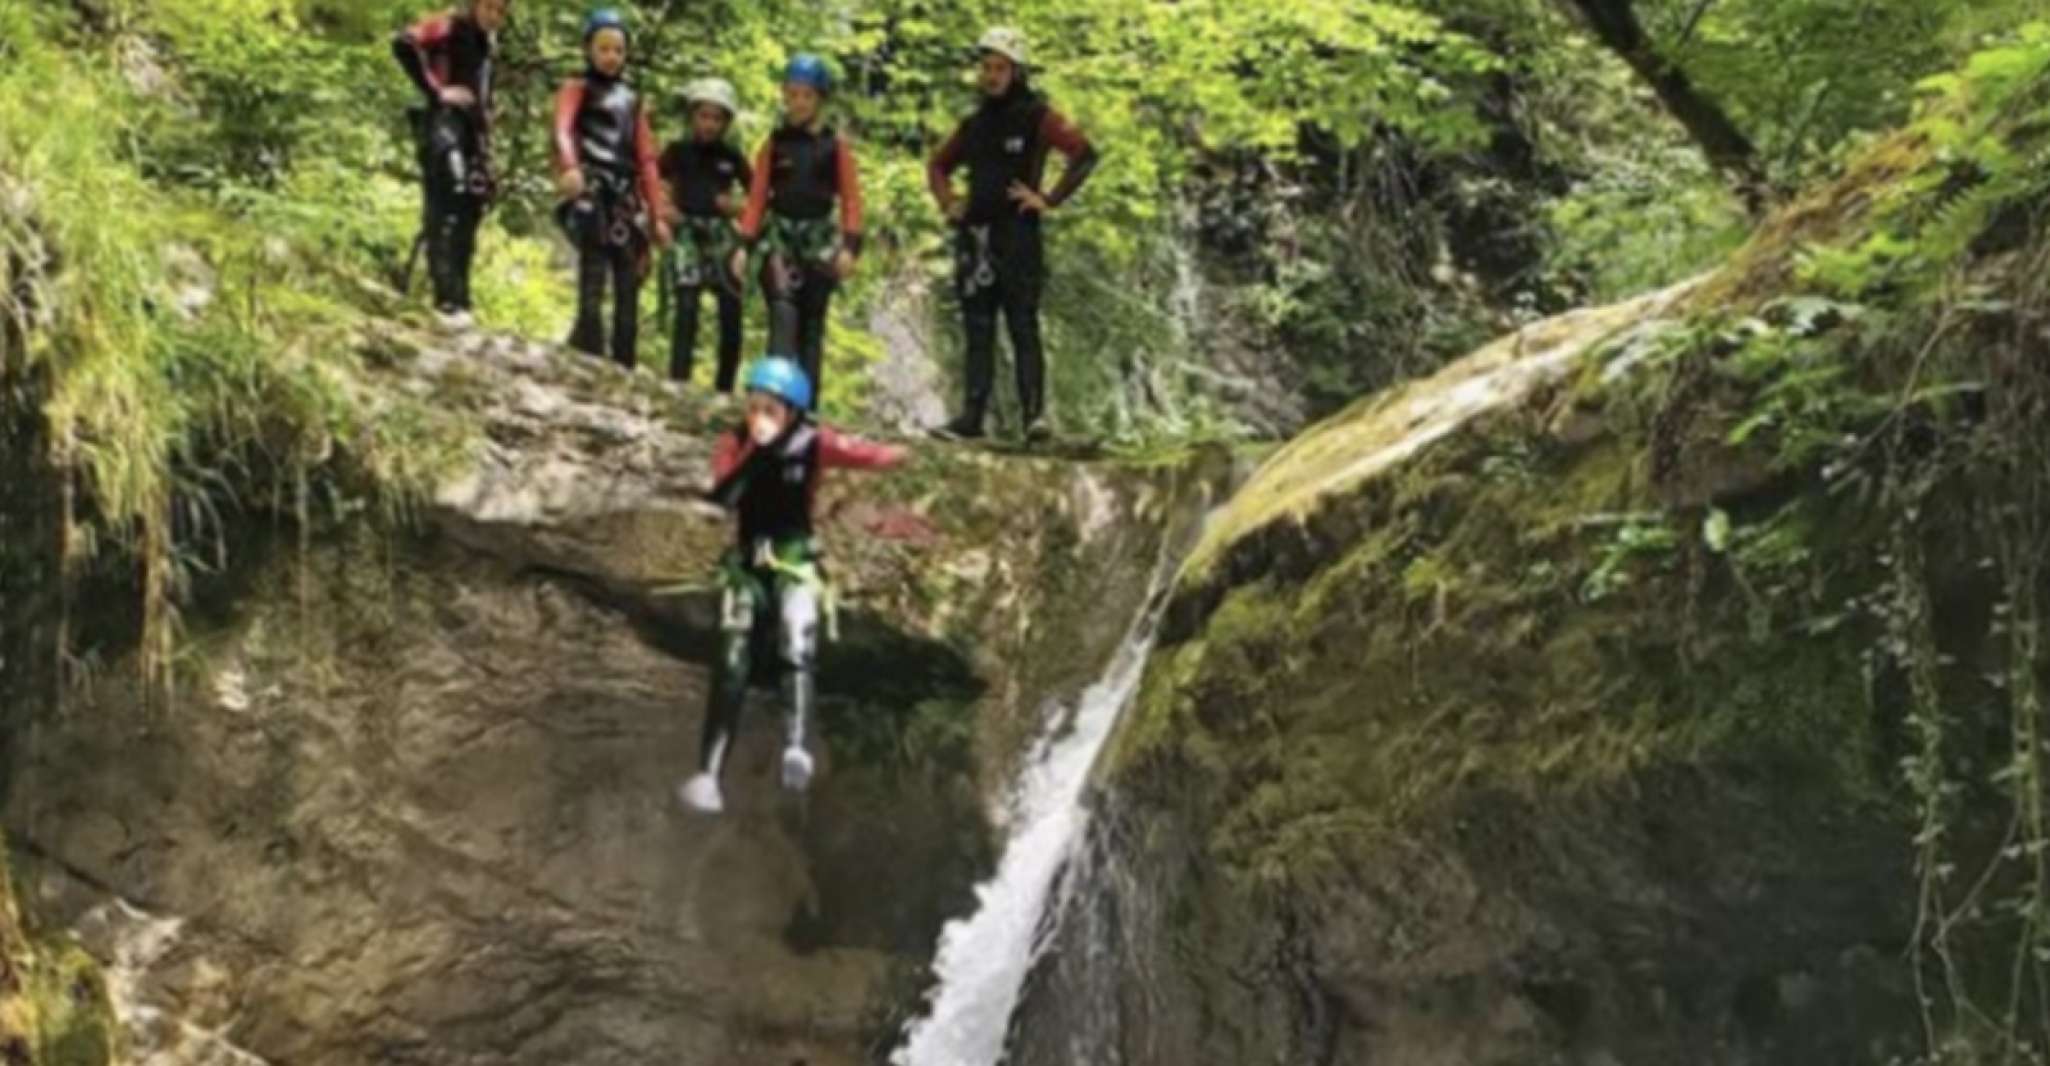 Canyoning tour - Ecouges lower part in Vercors - Grenoble - Housity